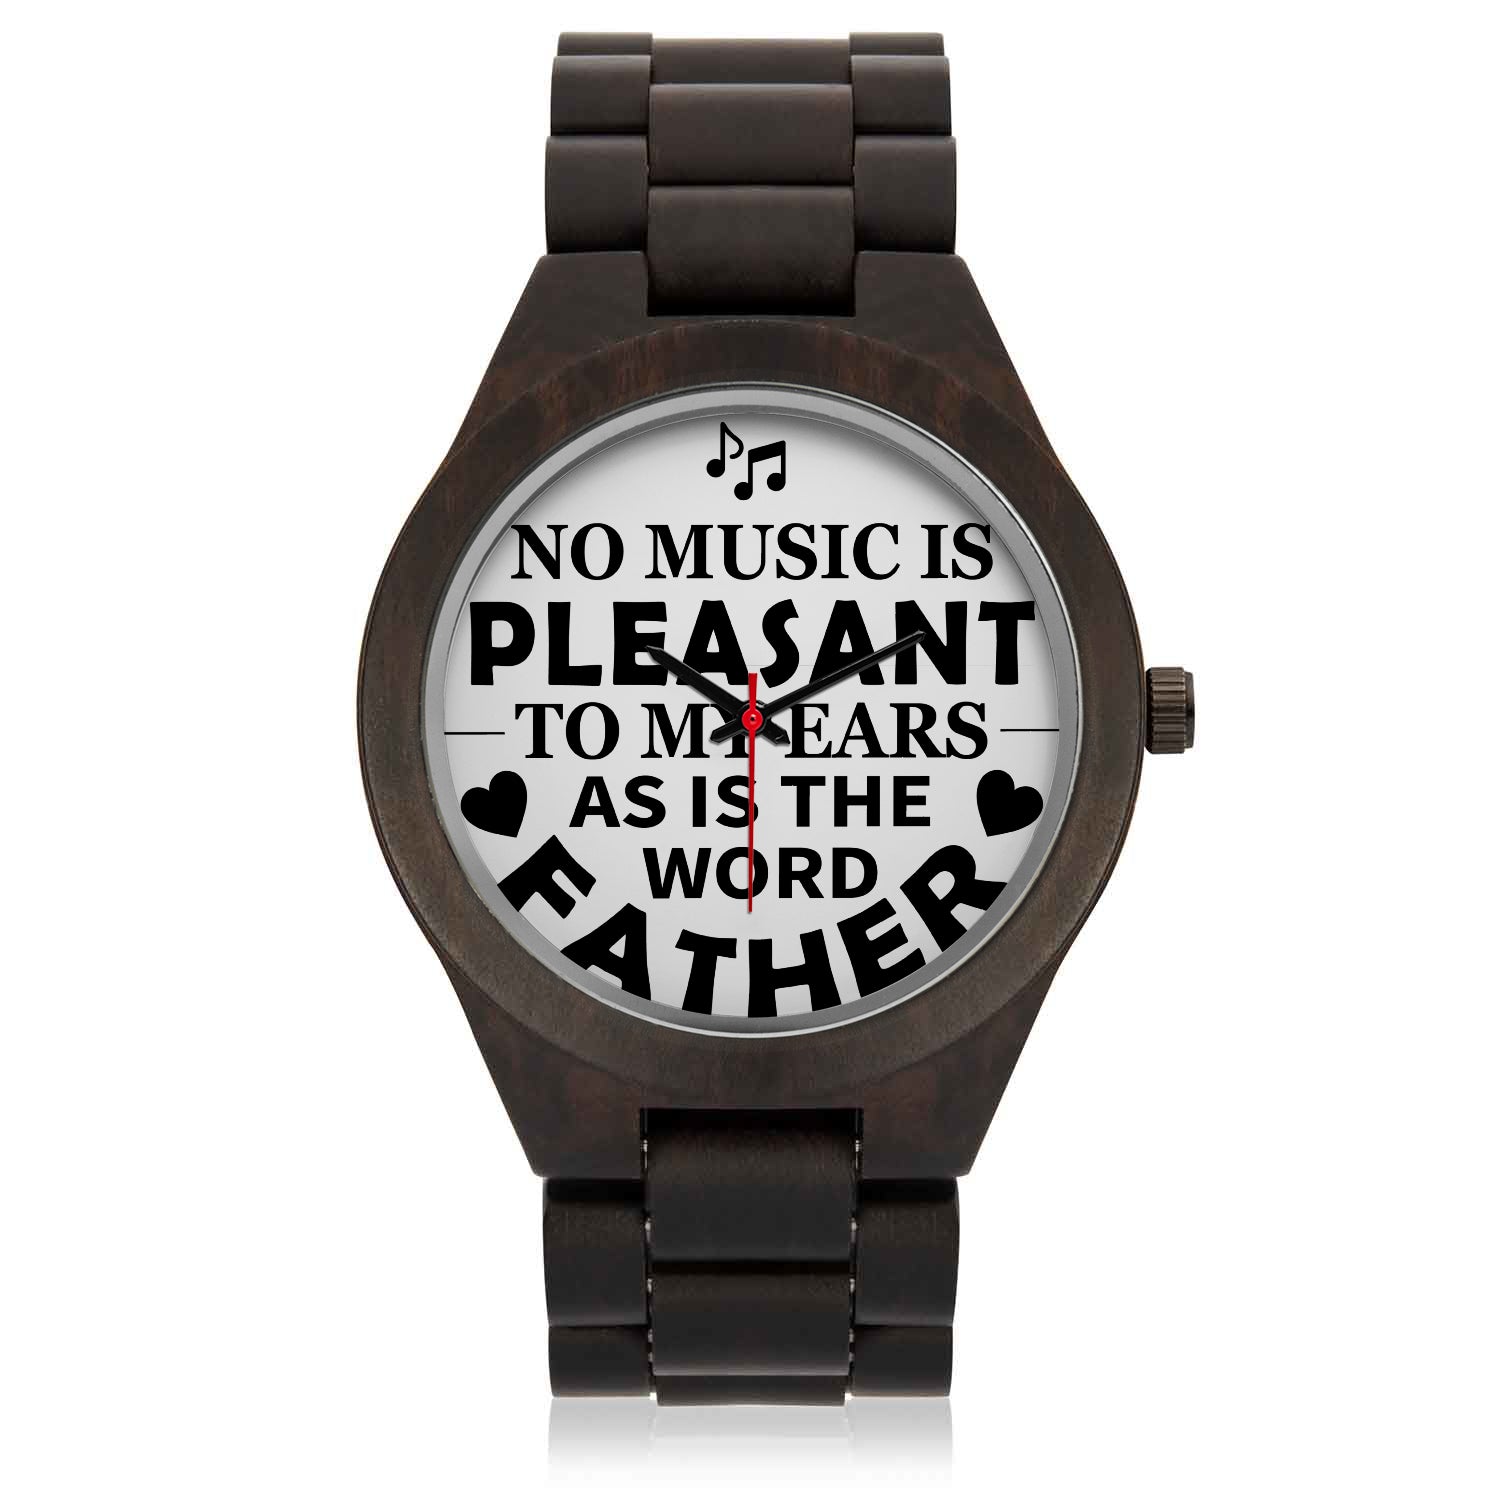 MUSIC FATHER WOOD WATCH